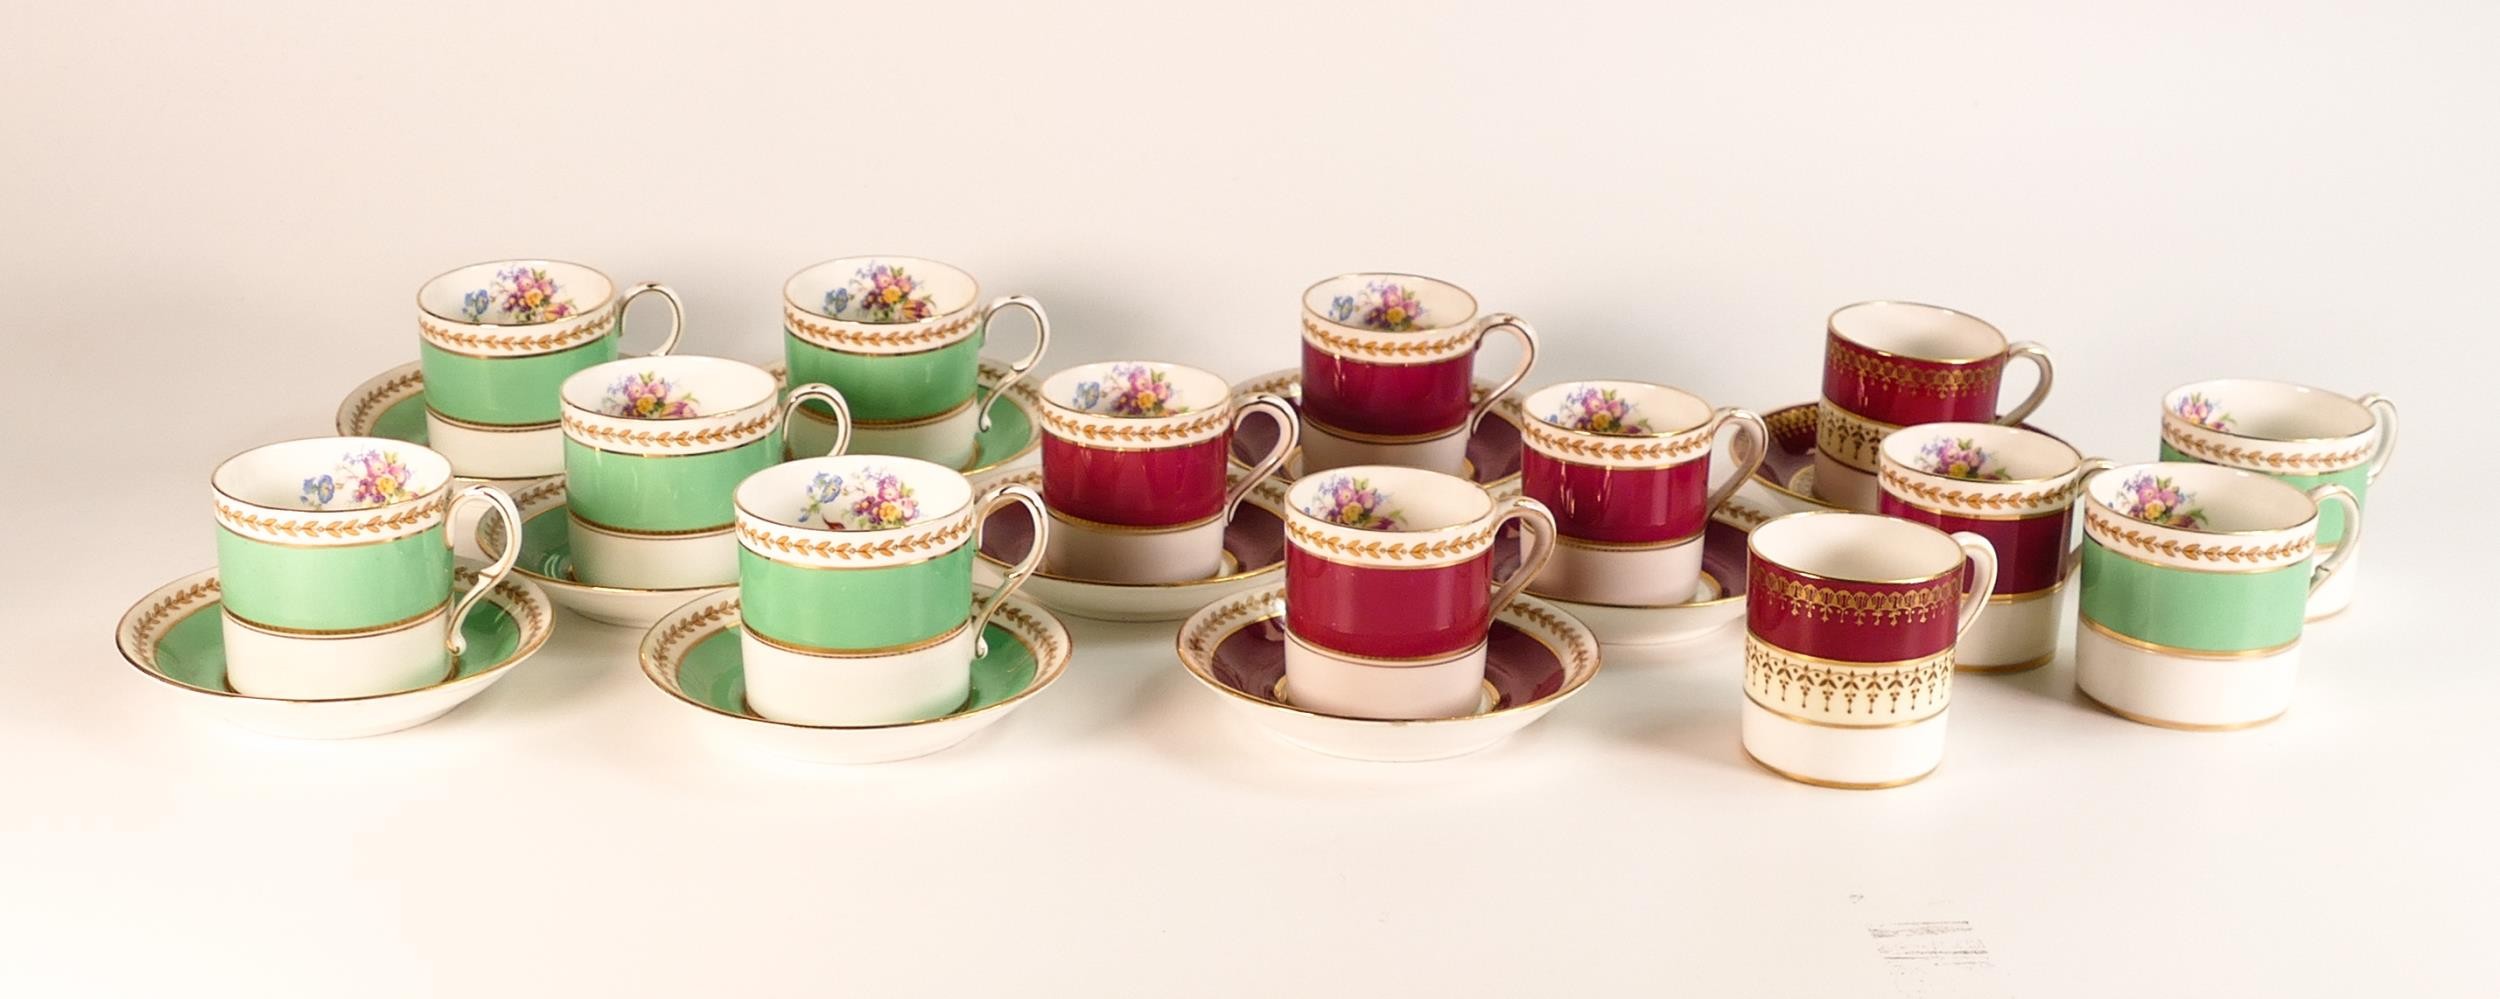 A collection of Paragon China coffee ware with printed pheasant and floral insets to include - green